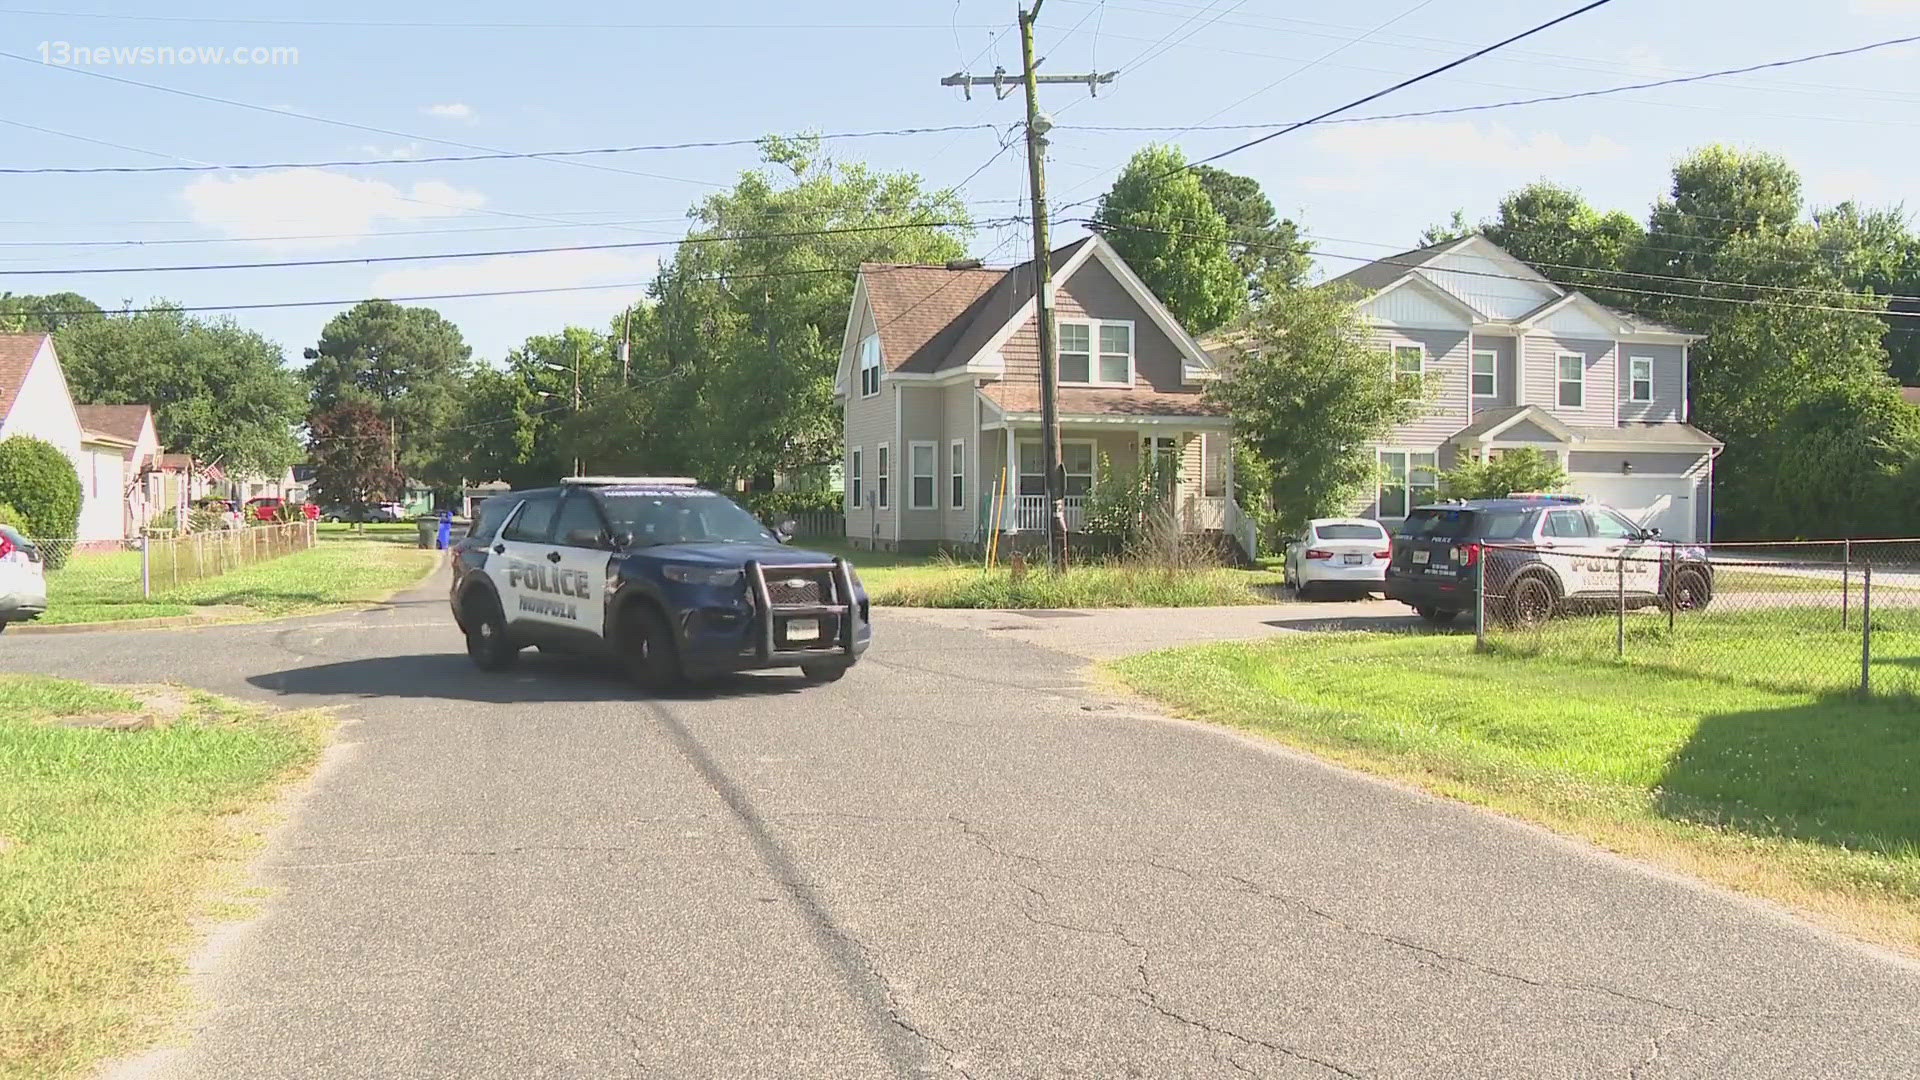 An 11-year-old girl is recovering after someone stabbed her in Norfolk.